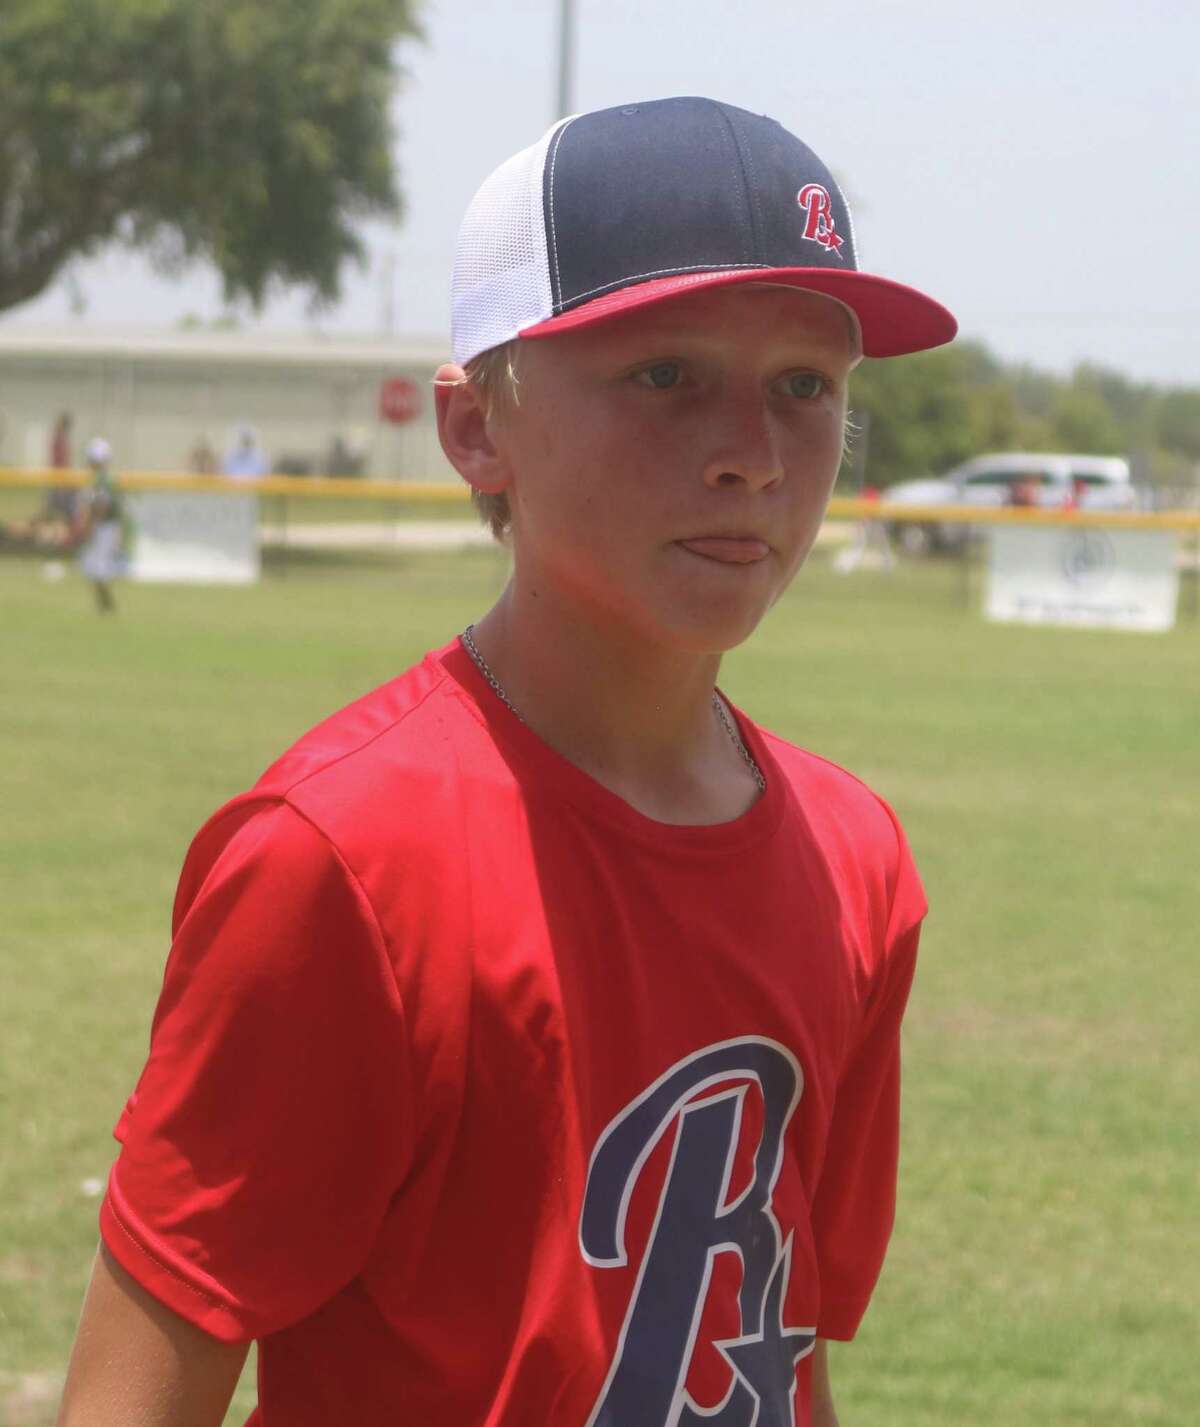 Bayside Area Little League Majors all-star Owen Zuteck went 4-for-4 in Monday night's game. He set the table for the walk off win with a game-tying single, his fourth single of the contest.